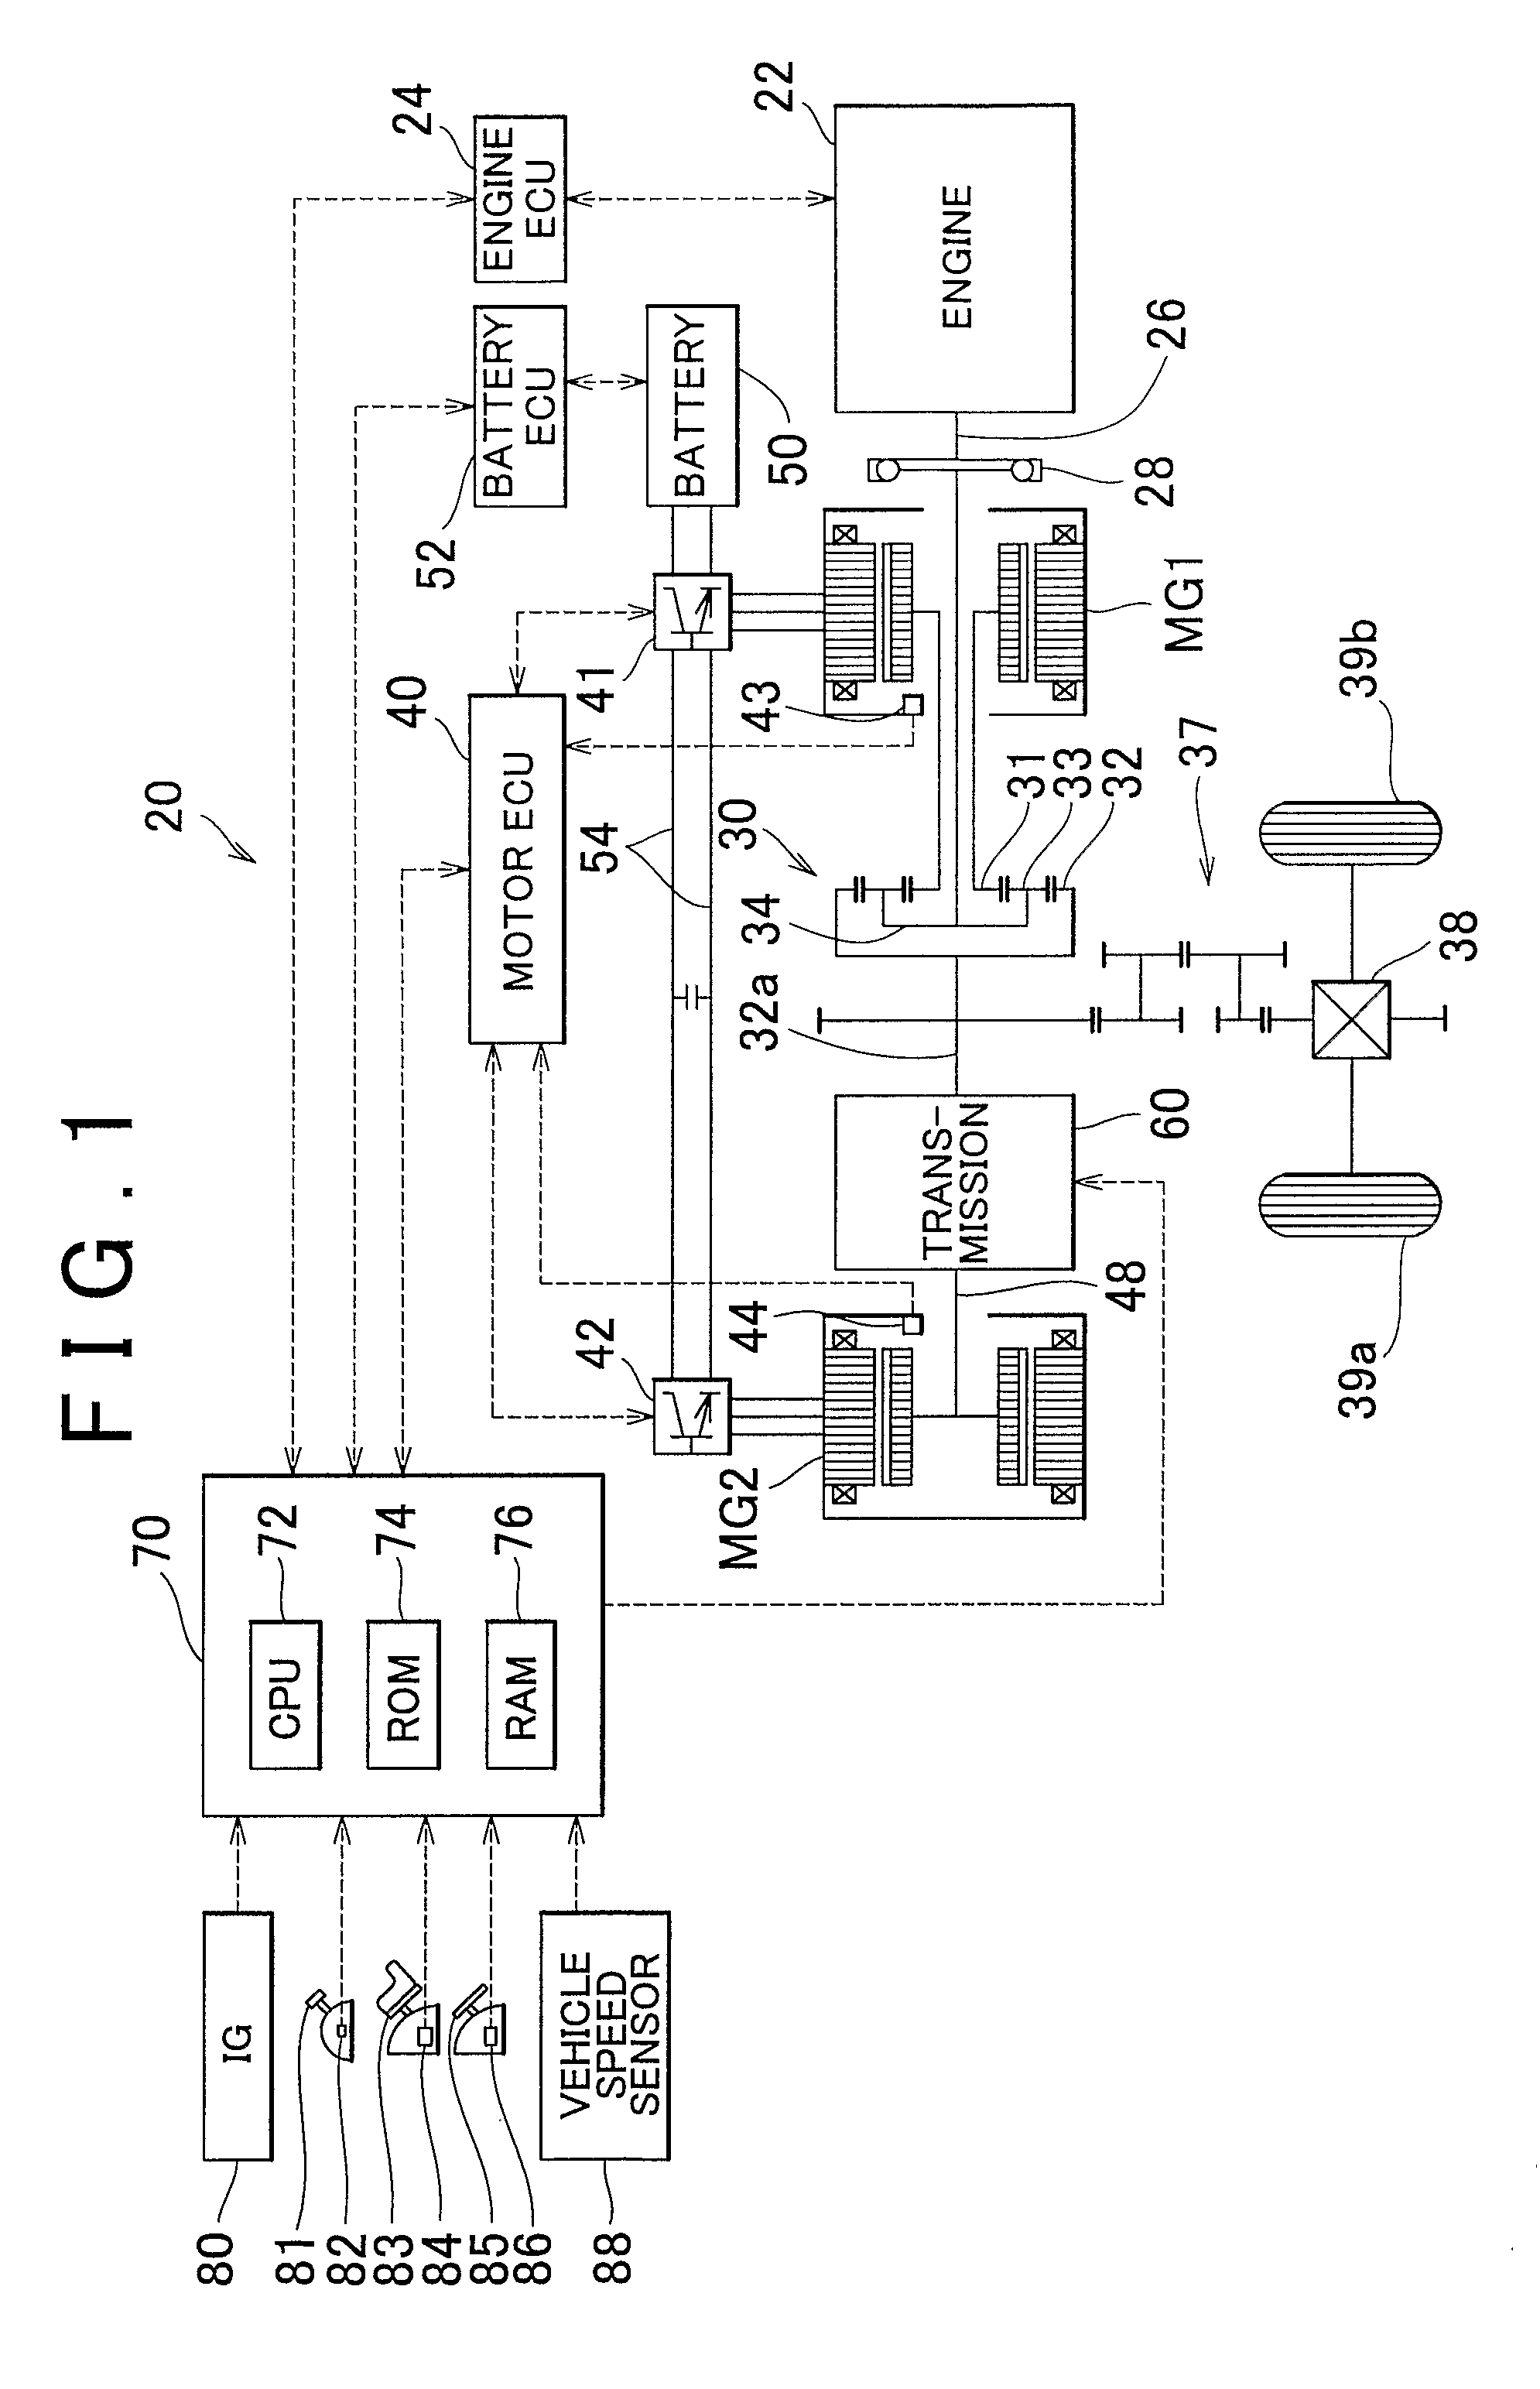 Drive System, Power Output System Incorporating The Drive System, A Vehicle Equipped With The Power Output System, And Control Method For A Drive System